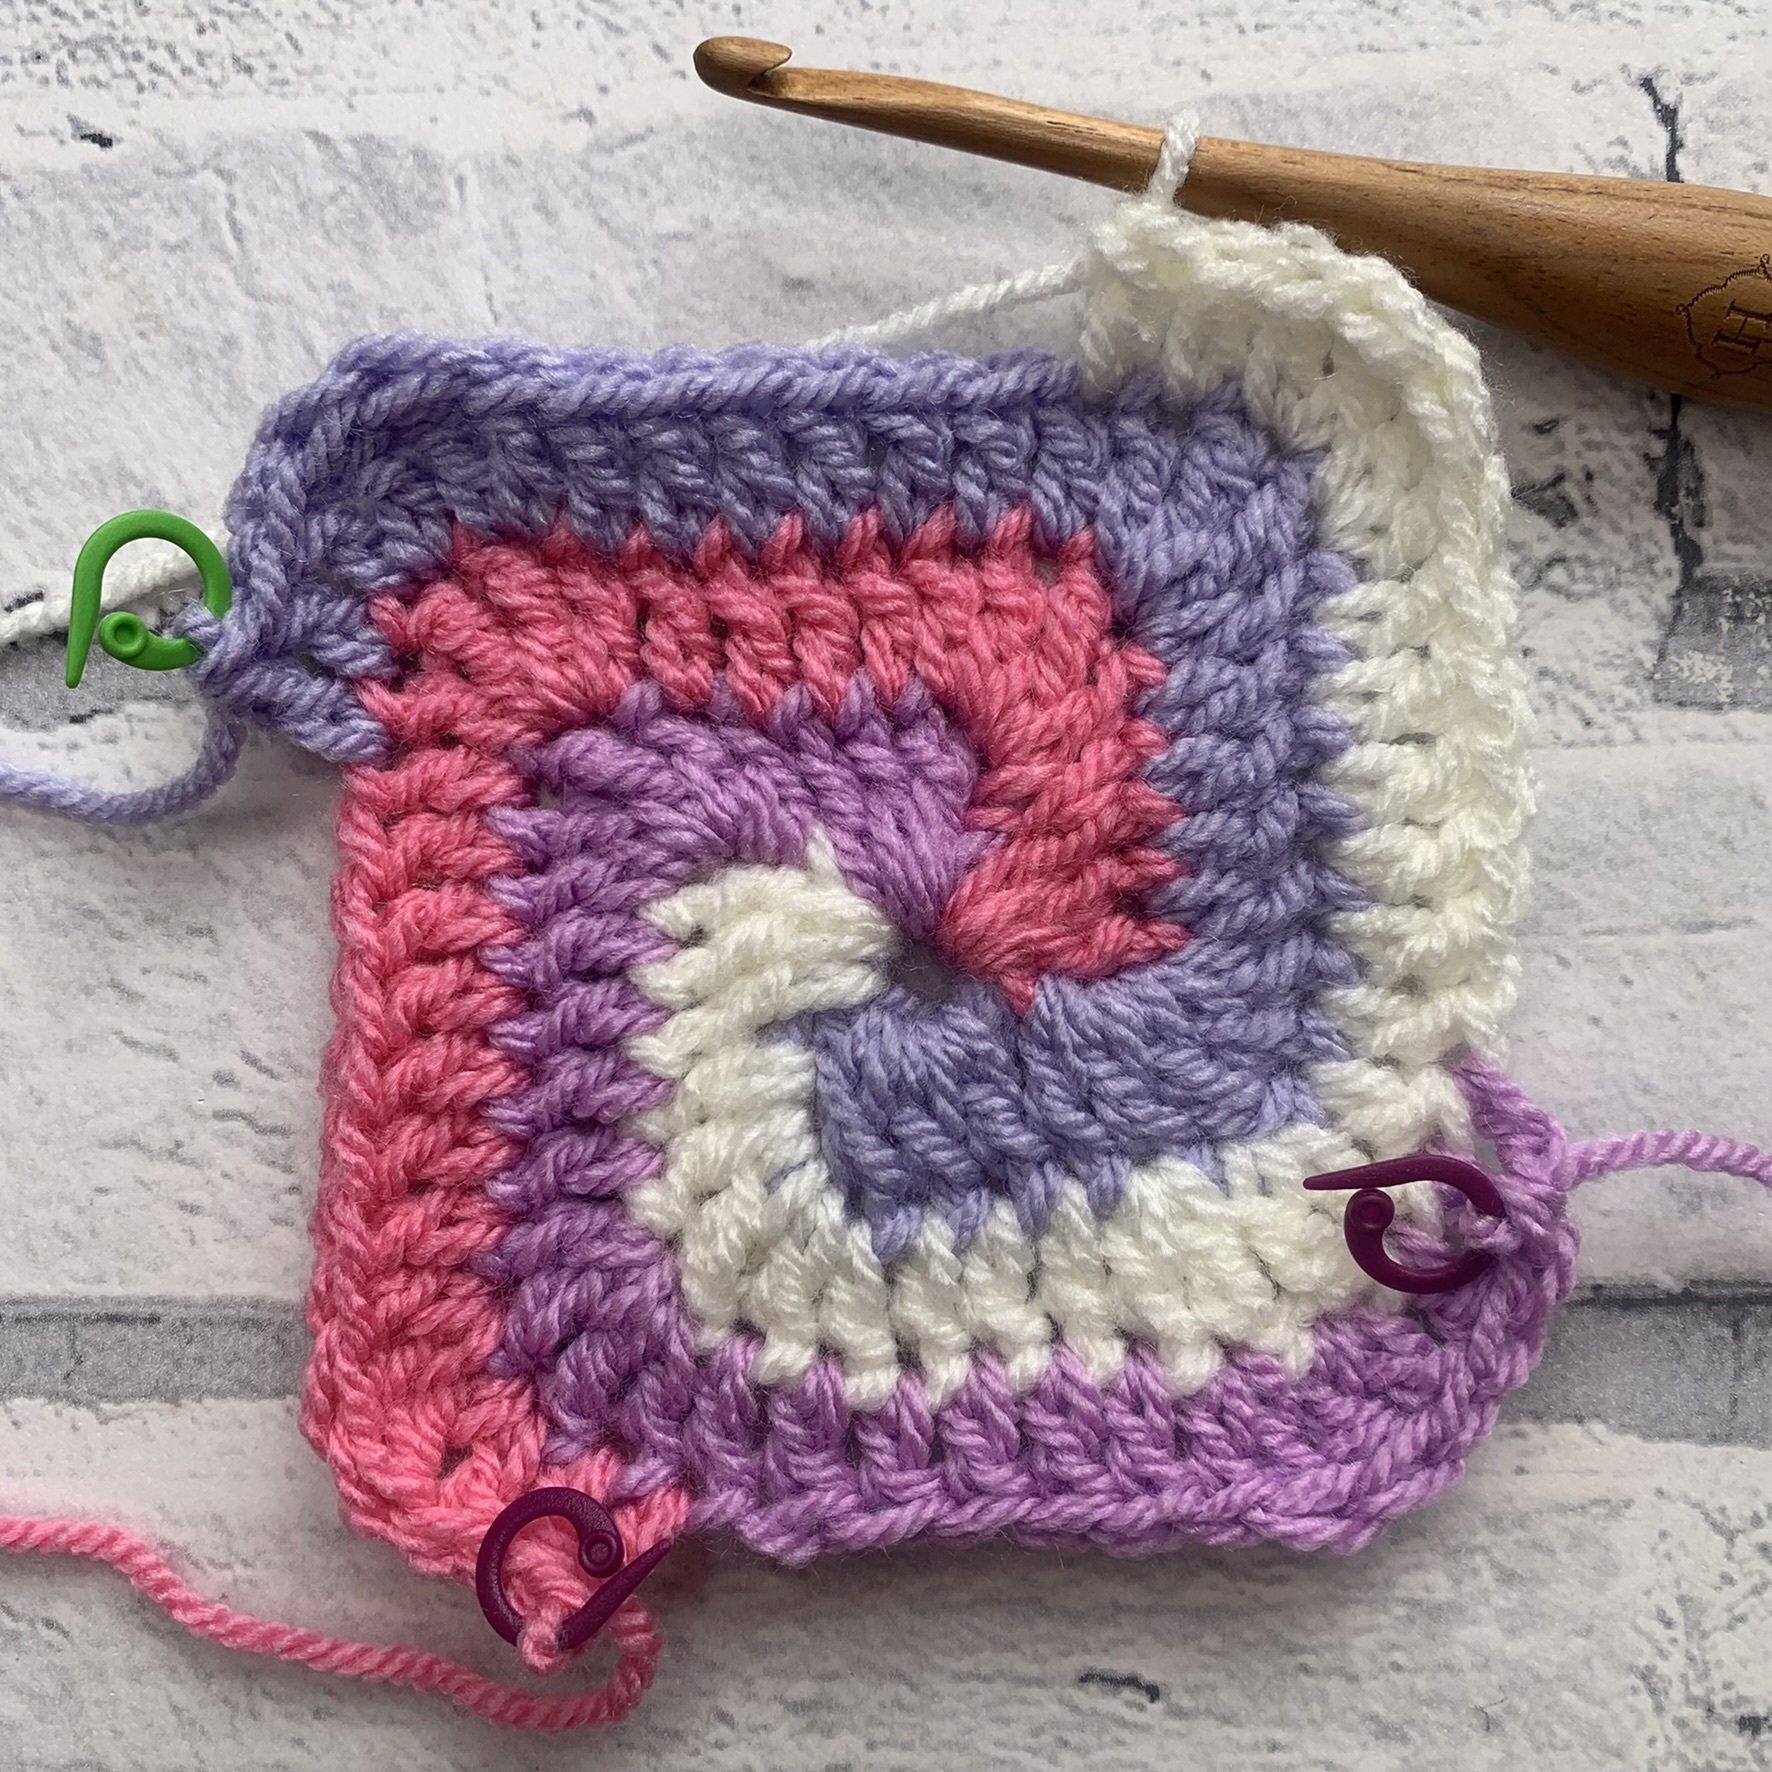 How to crochet a spiral granny Square